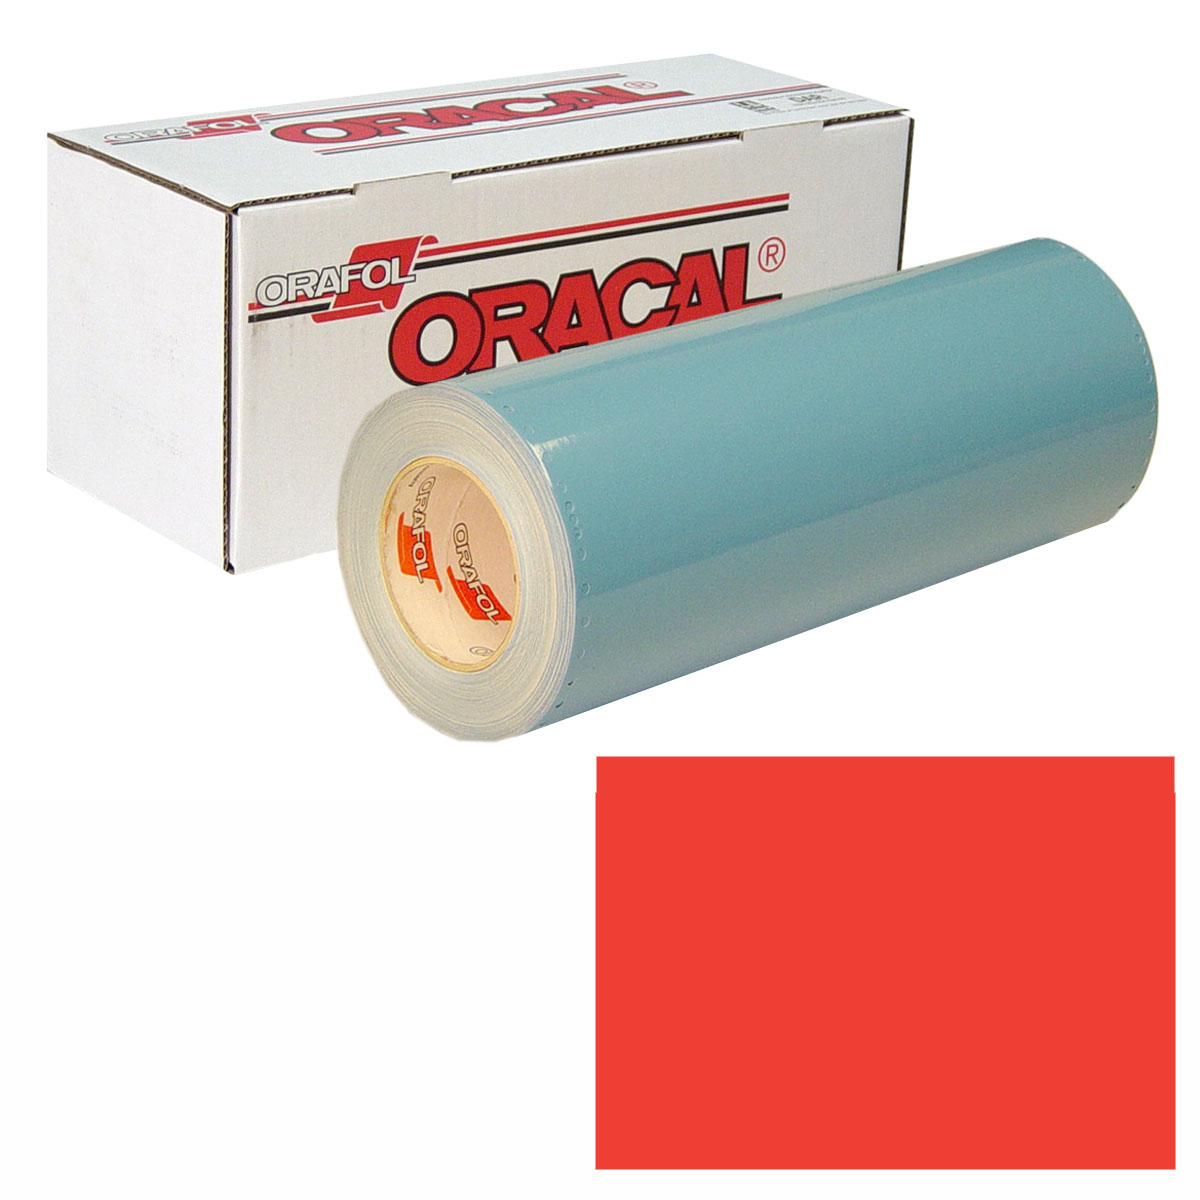 ORACAL 951 30in X 50yd 326 Signal Red